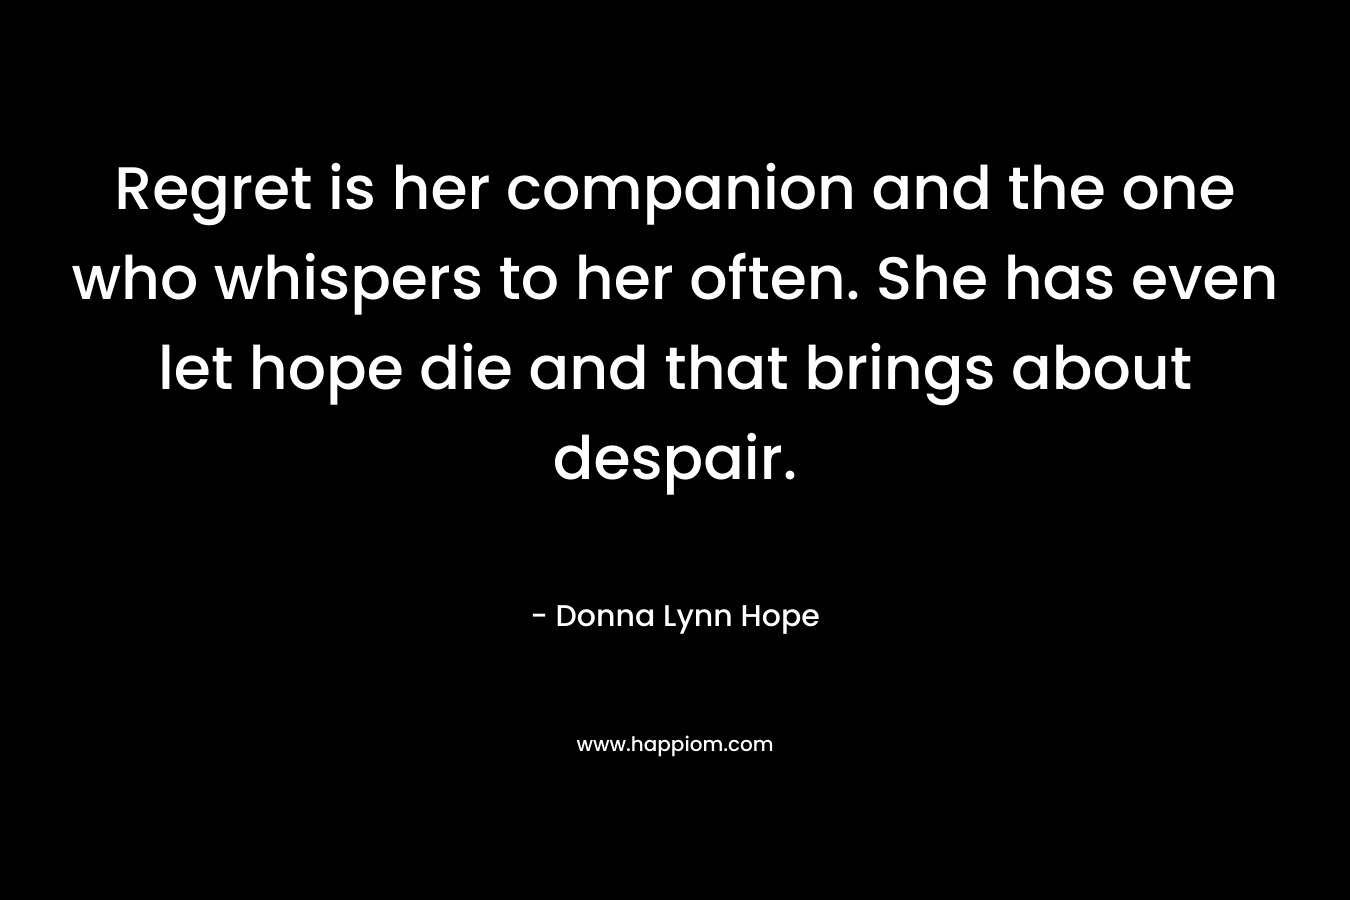 Regret is her companion and the one who whispers to her often. She has even let hope die and that brings about despair. – Donna Lynn Hope